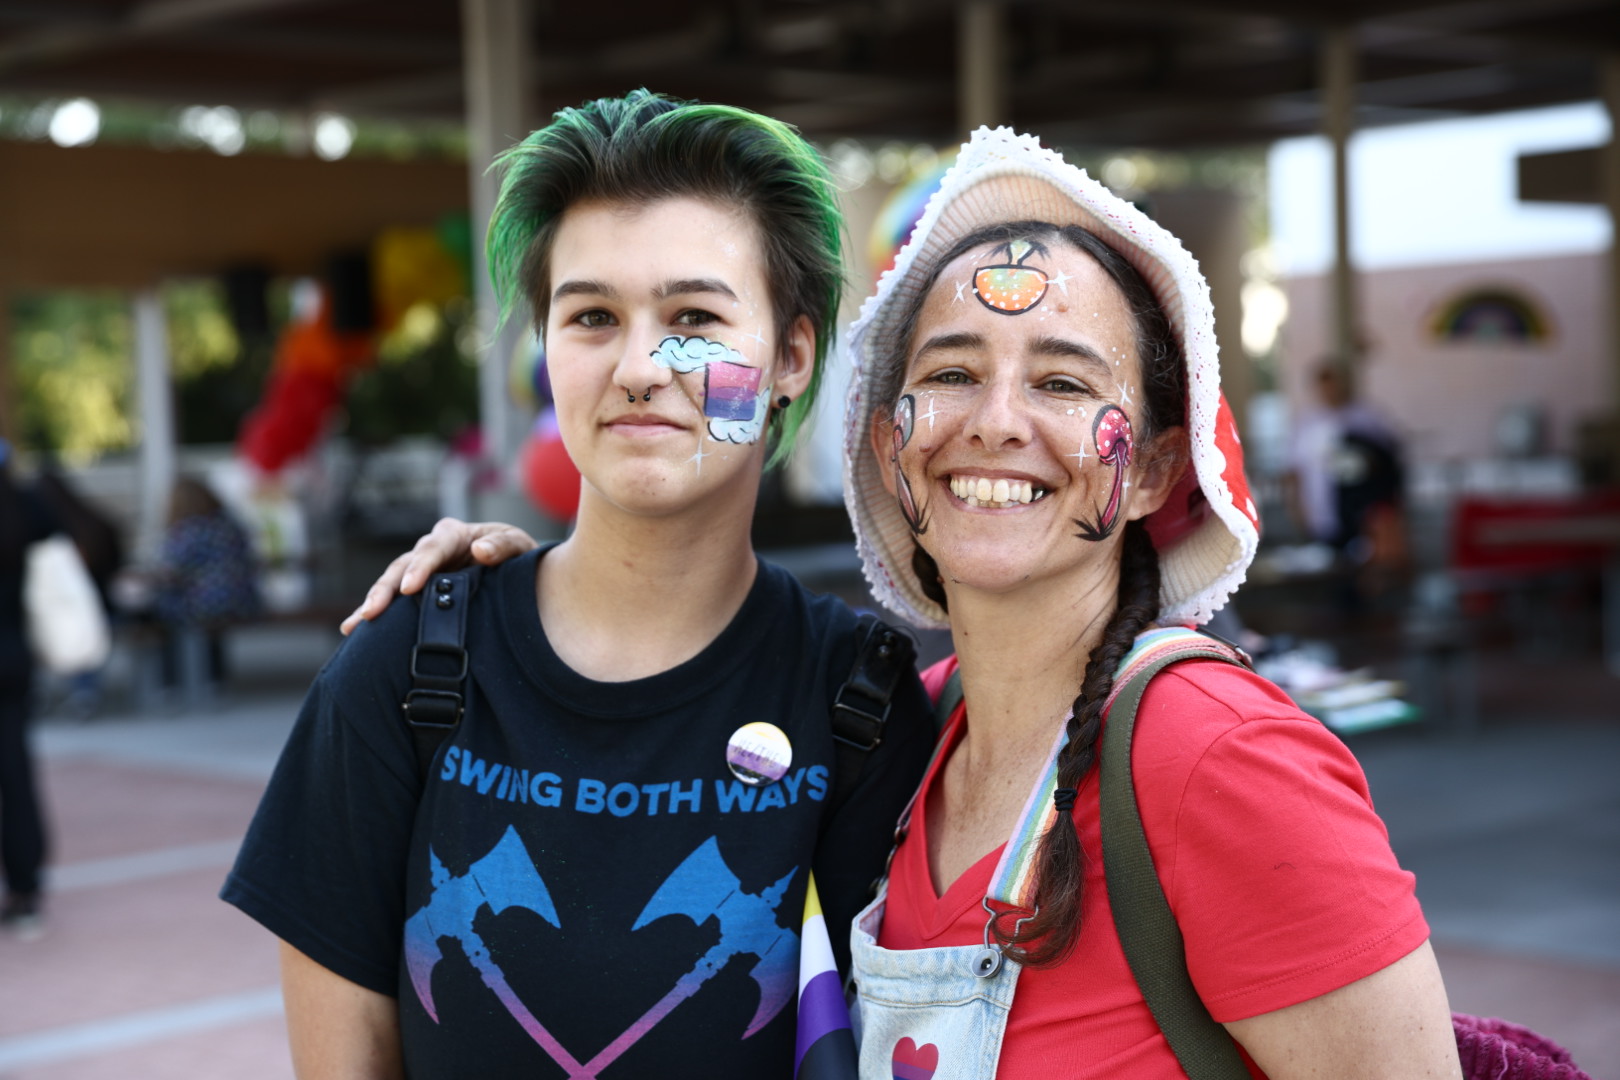 Attendees at Chaffey's Pride Celebration smile for a photo.